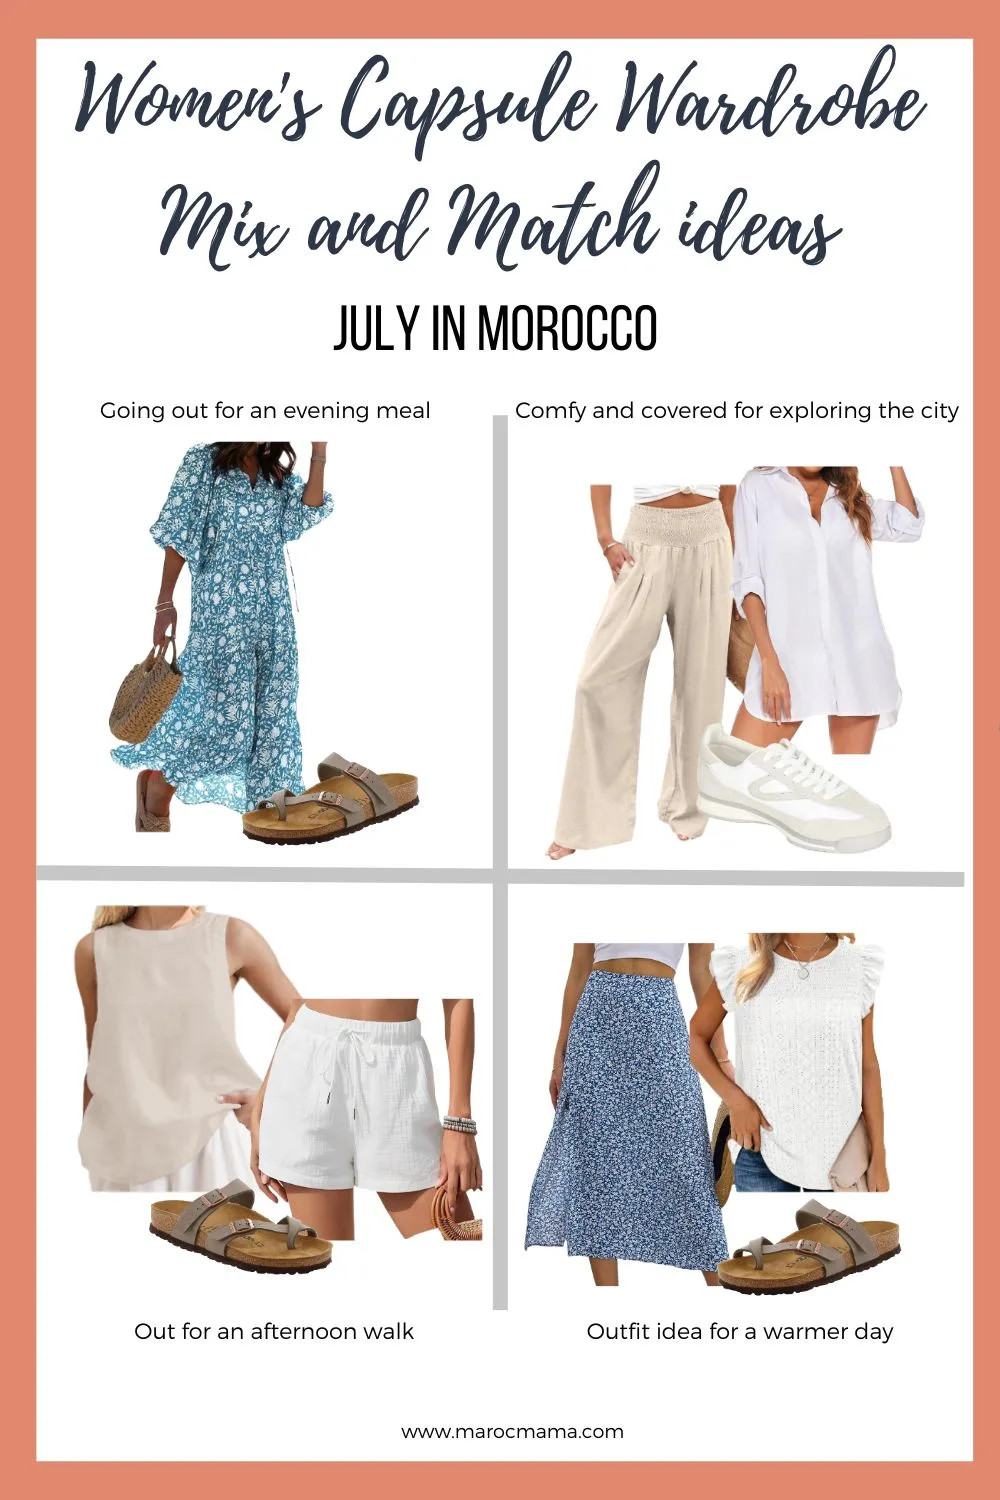 Women's travel capsule wardrobe when travelling to Morocco in July mix and match ideas